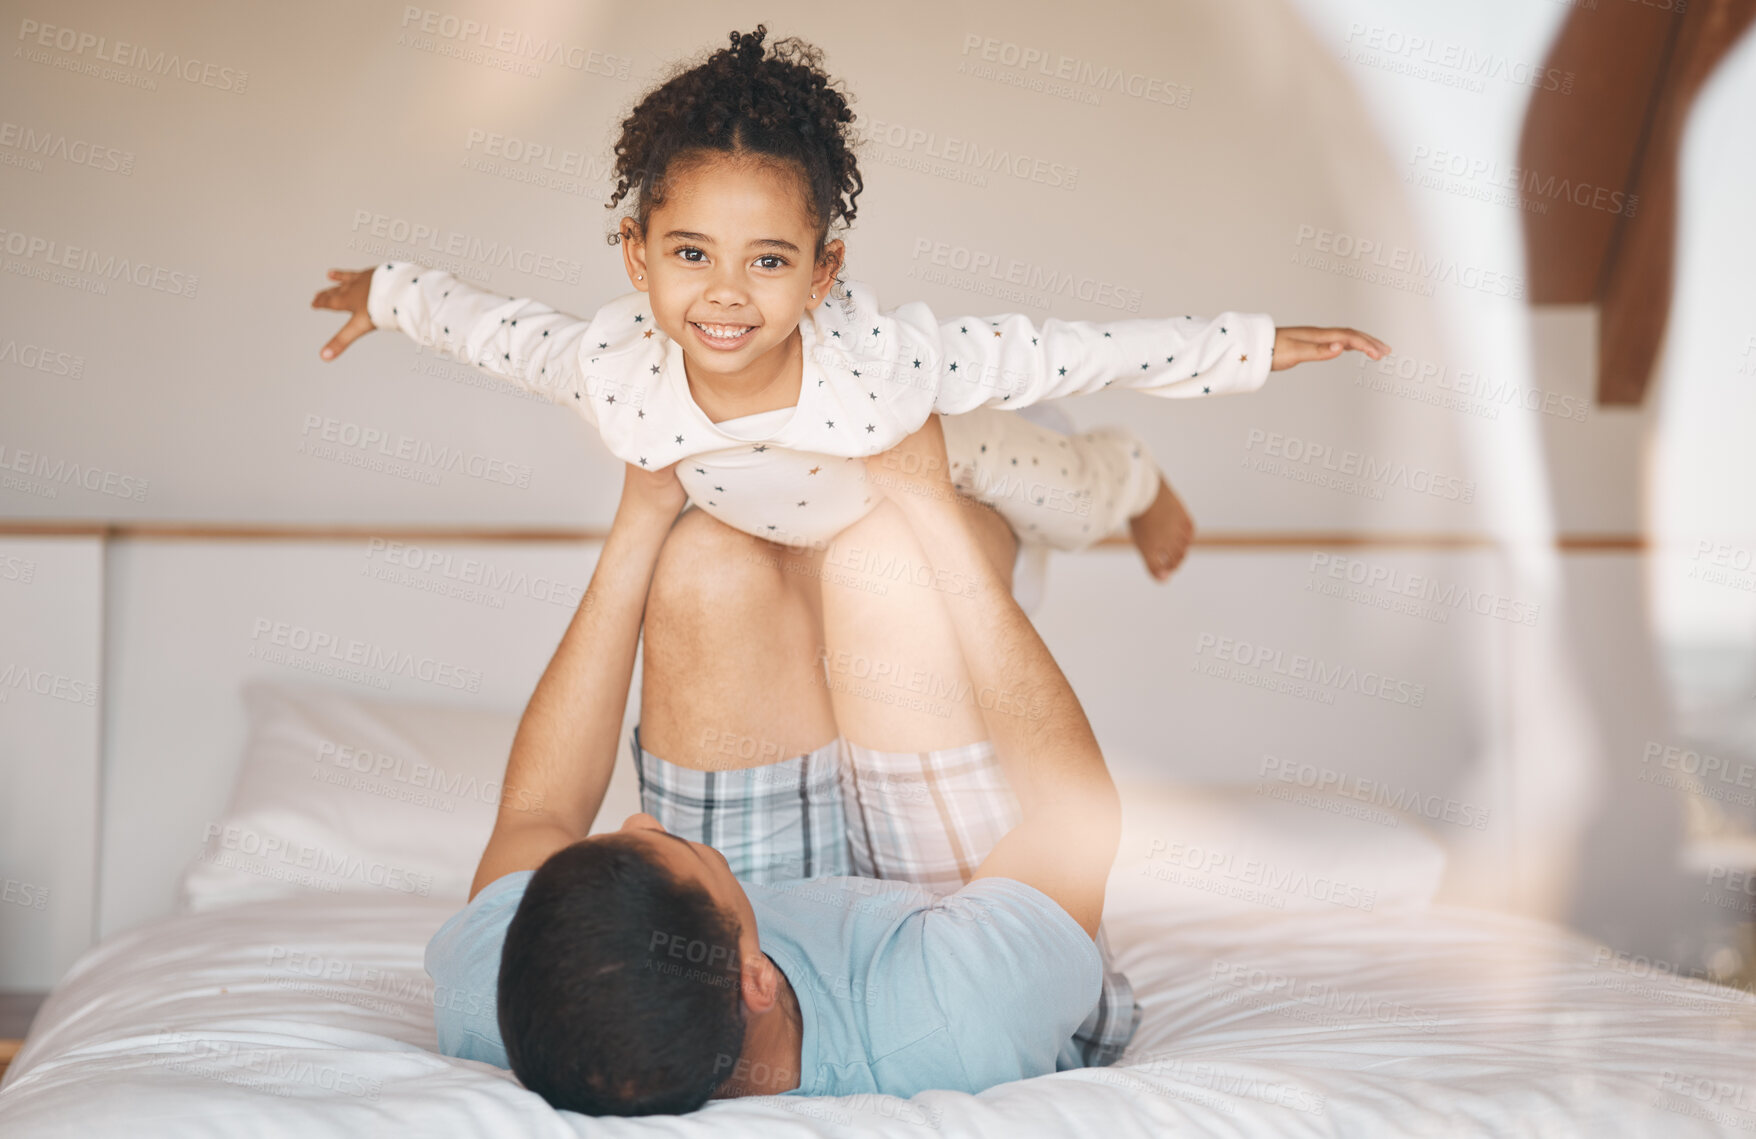 Buy stock photo Kid, father and airplane games on bed for support or relax at home for crazy fun. Portrait, dad and happy girl child excited to fly in bedroom for freedom, fantasy and balance of play, care or energy